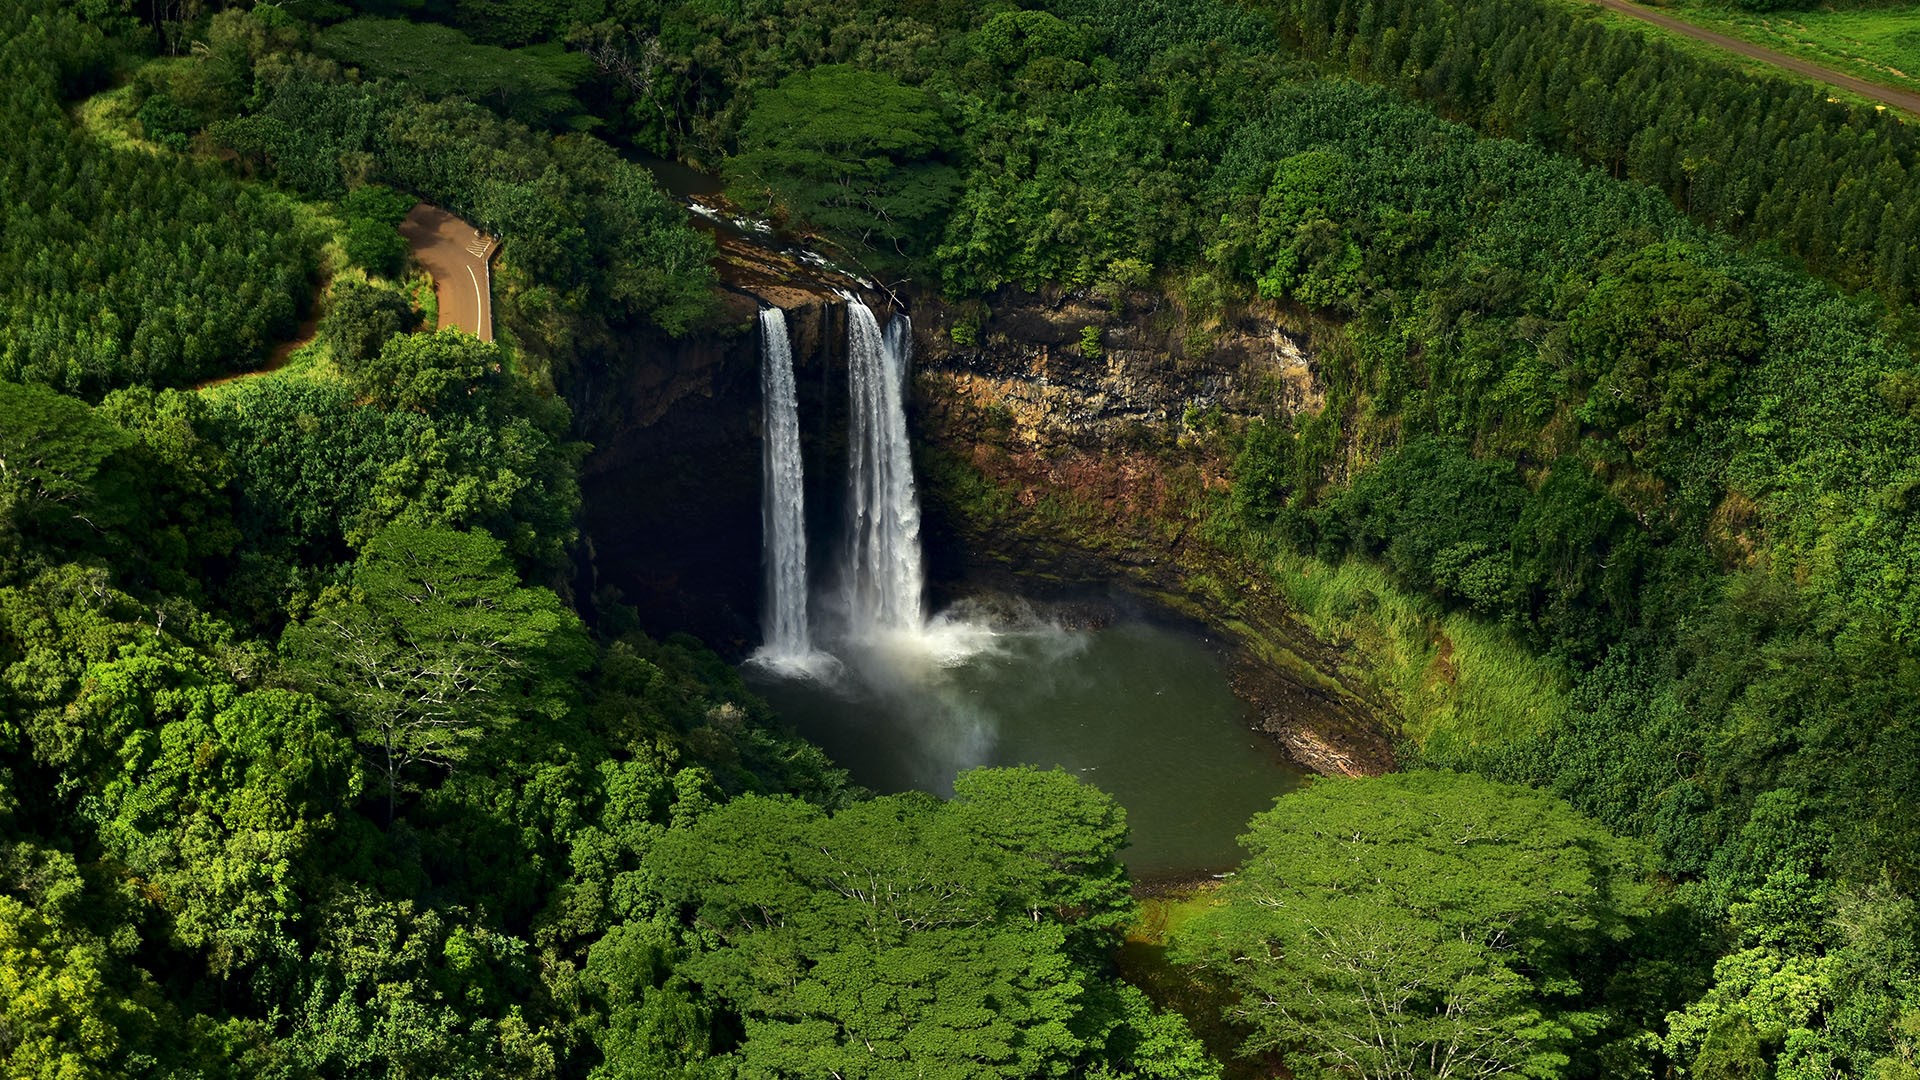 General 1920x1080 nature landscape trees forest water waterfall aerial view tropical Hawaii Kauai USA